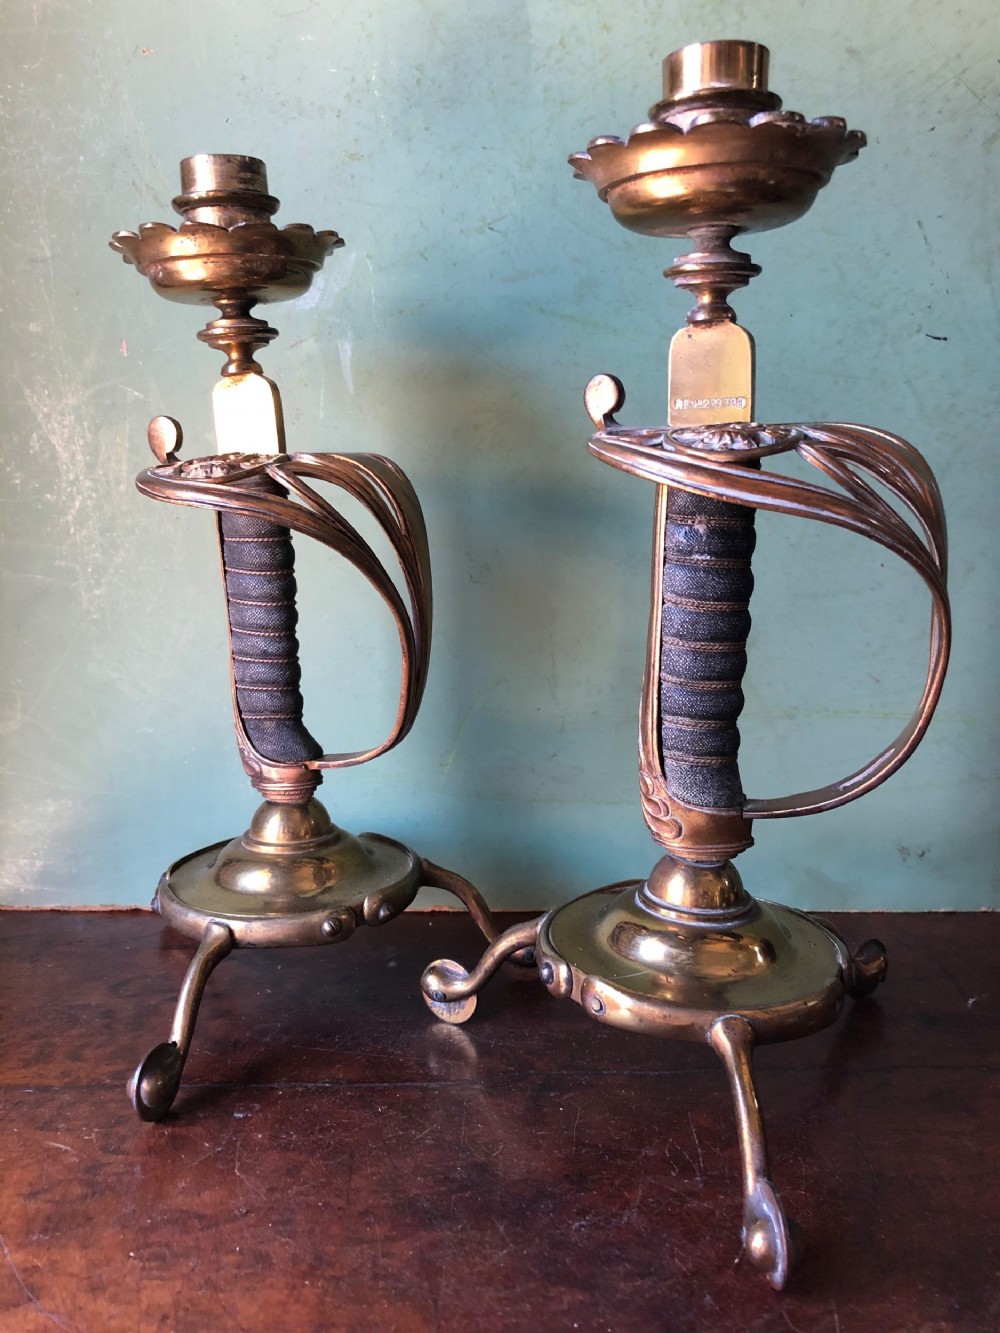 pair of c19th victorian period gilded and lacquered brass military design candlesticks with swordhilt bodies